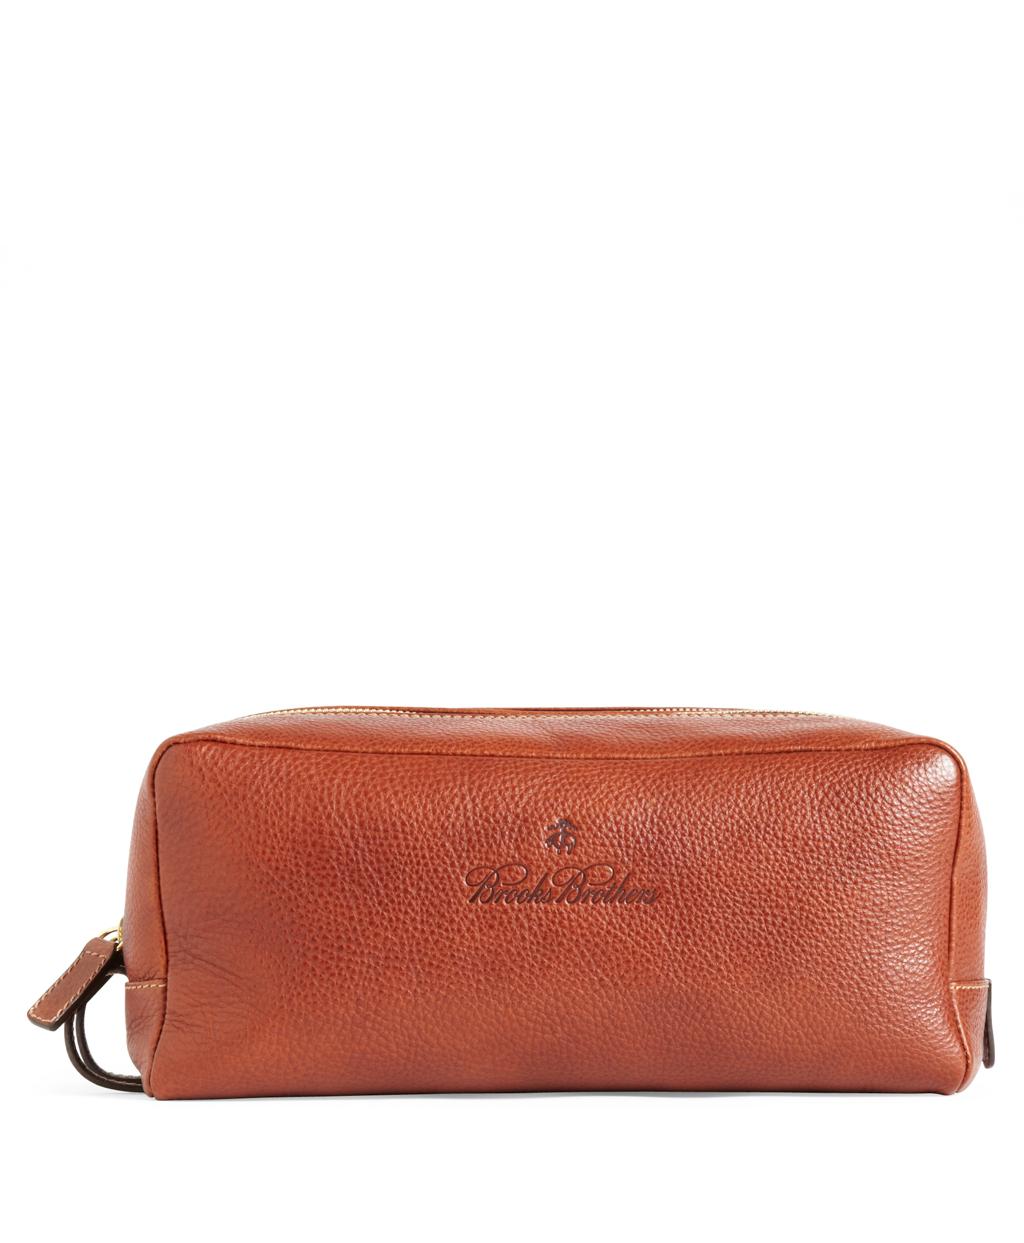 Brooks Brothers Leather Travel Toiletry Case in Brown for Men - Lyst